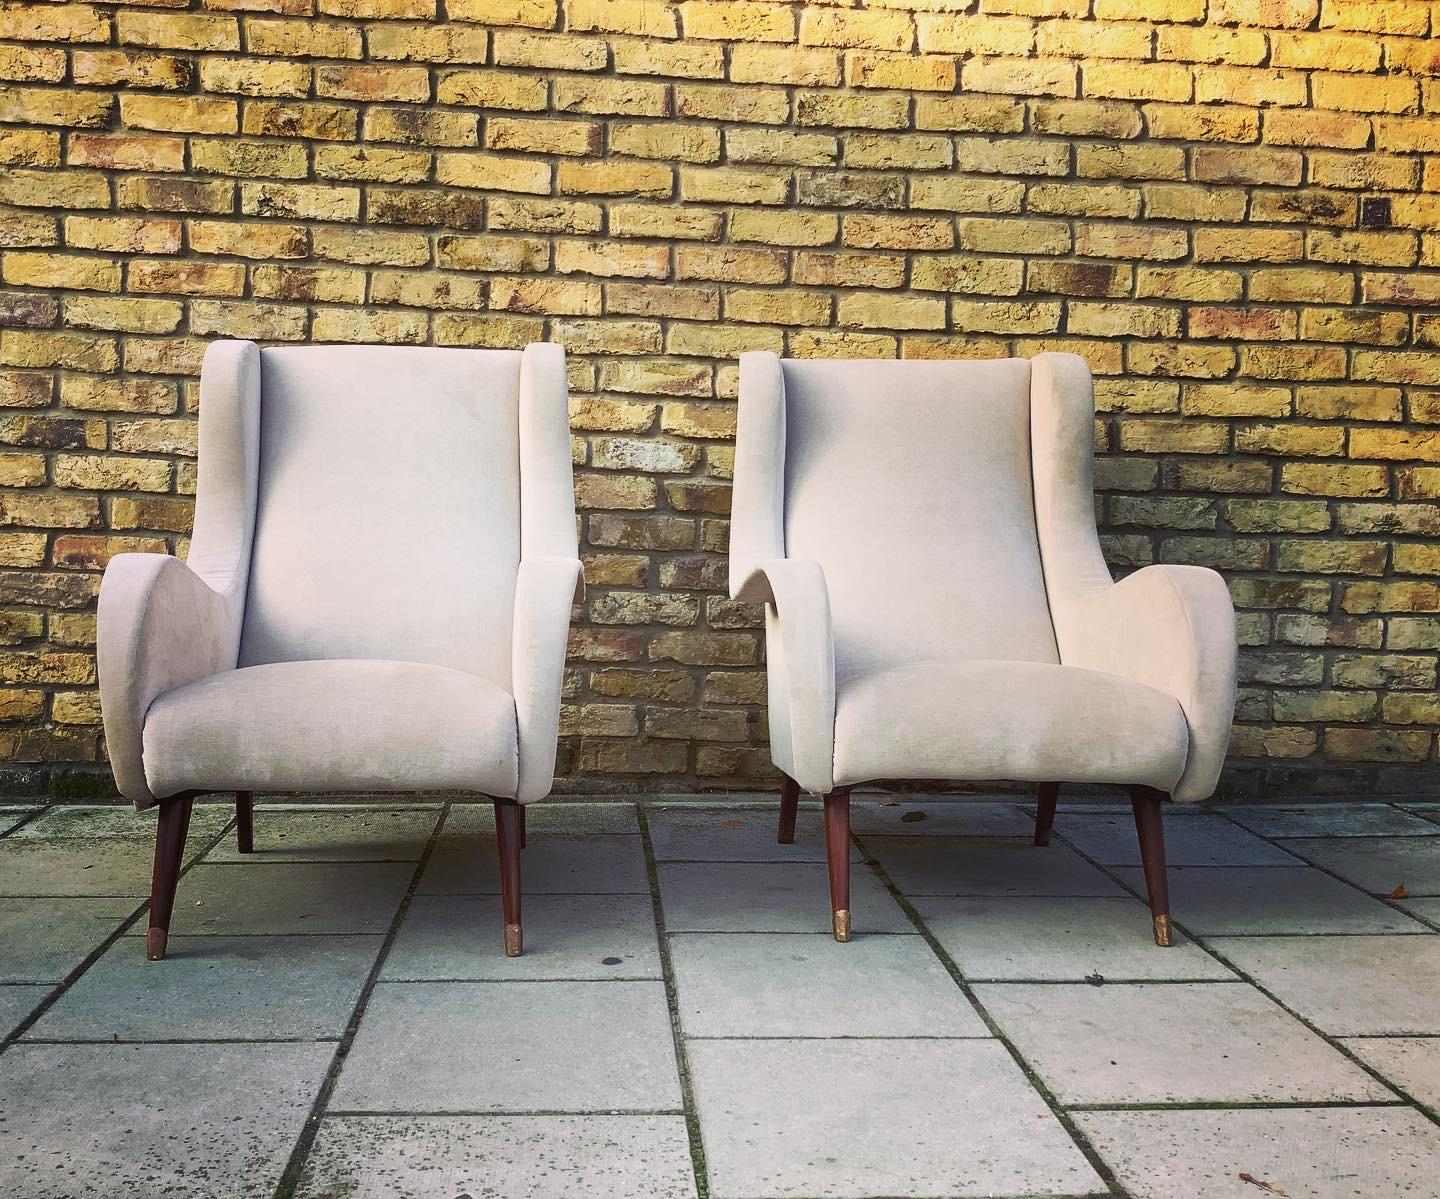 Fantastic shaped pair of 1950’s French armchairs in a warm light fabric.